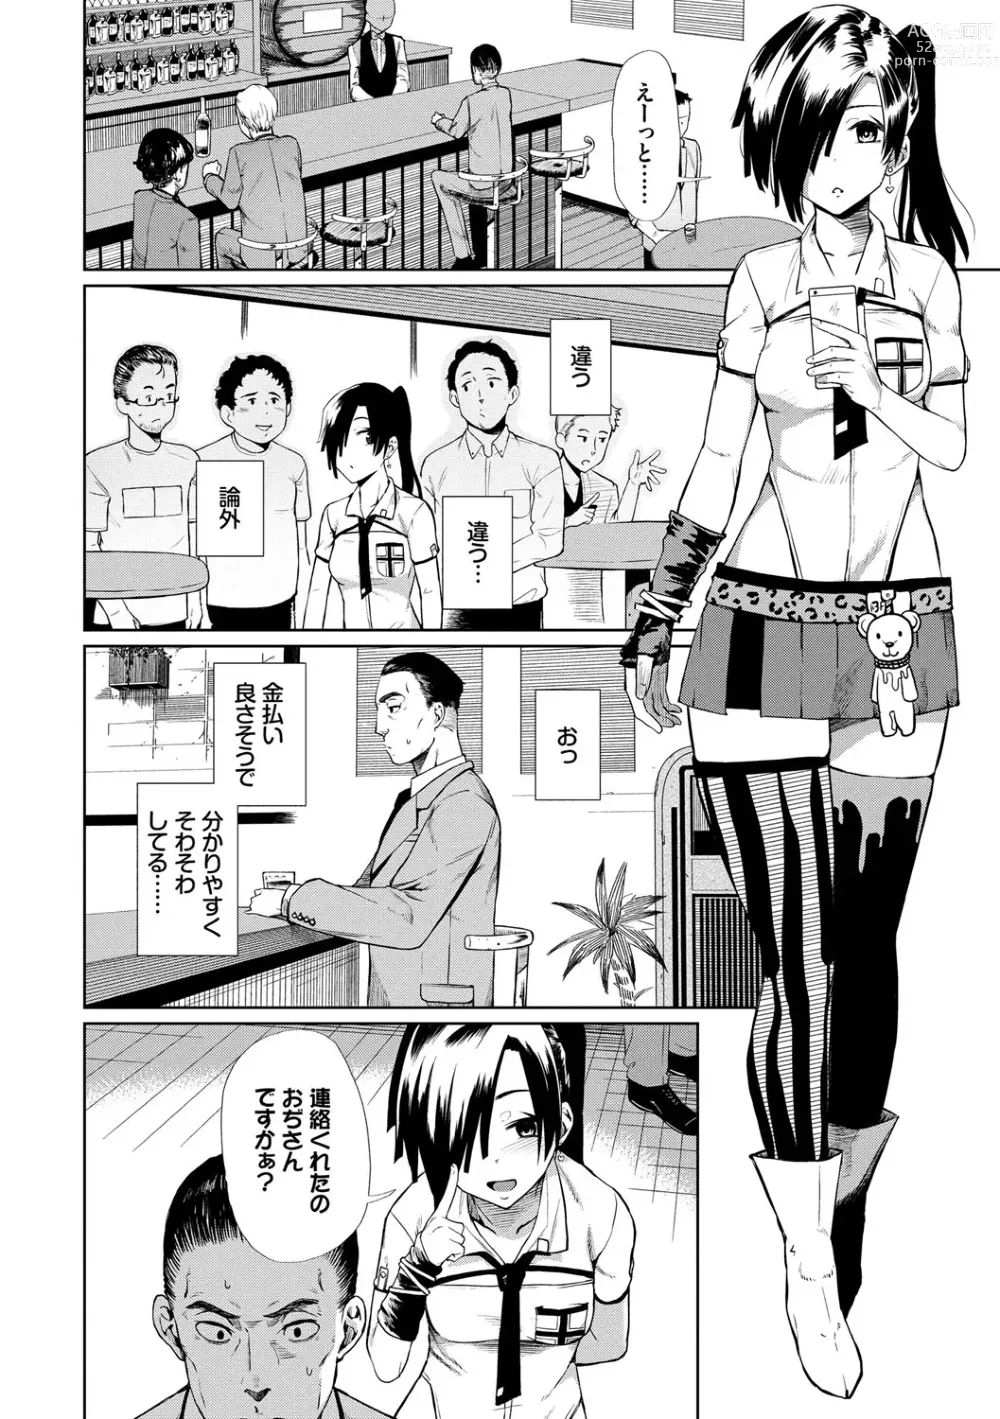 Page 5 of manga Happy End